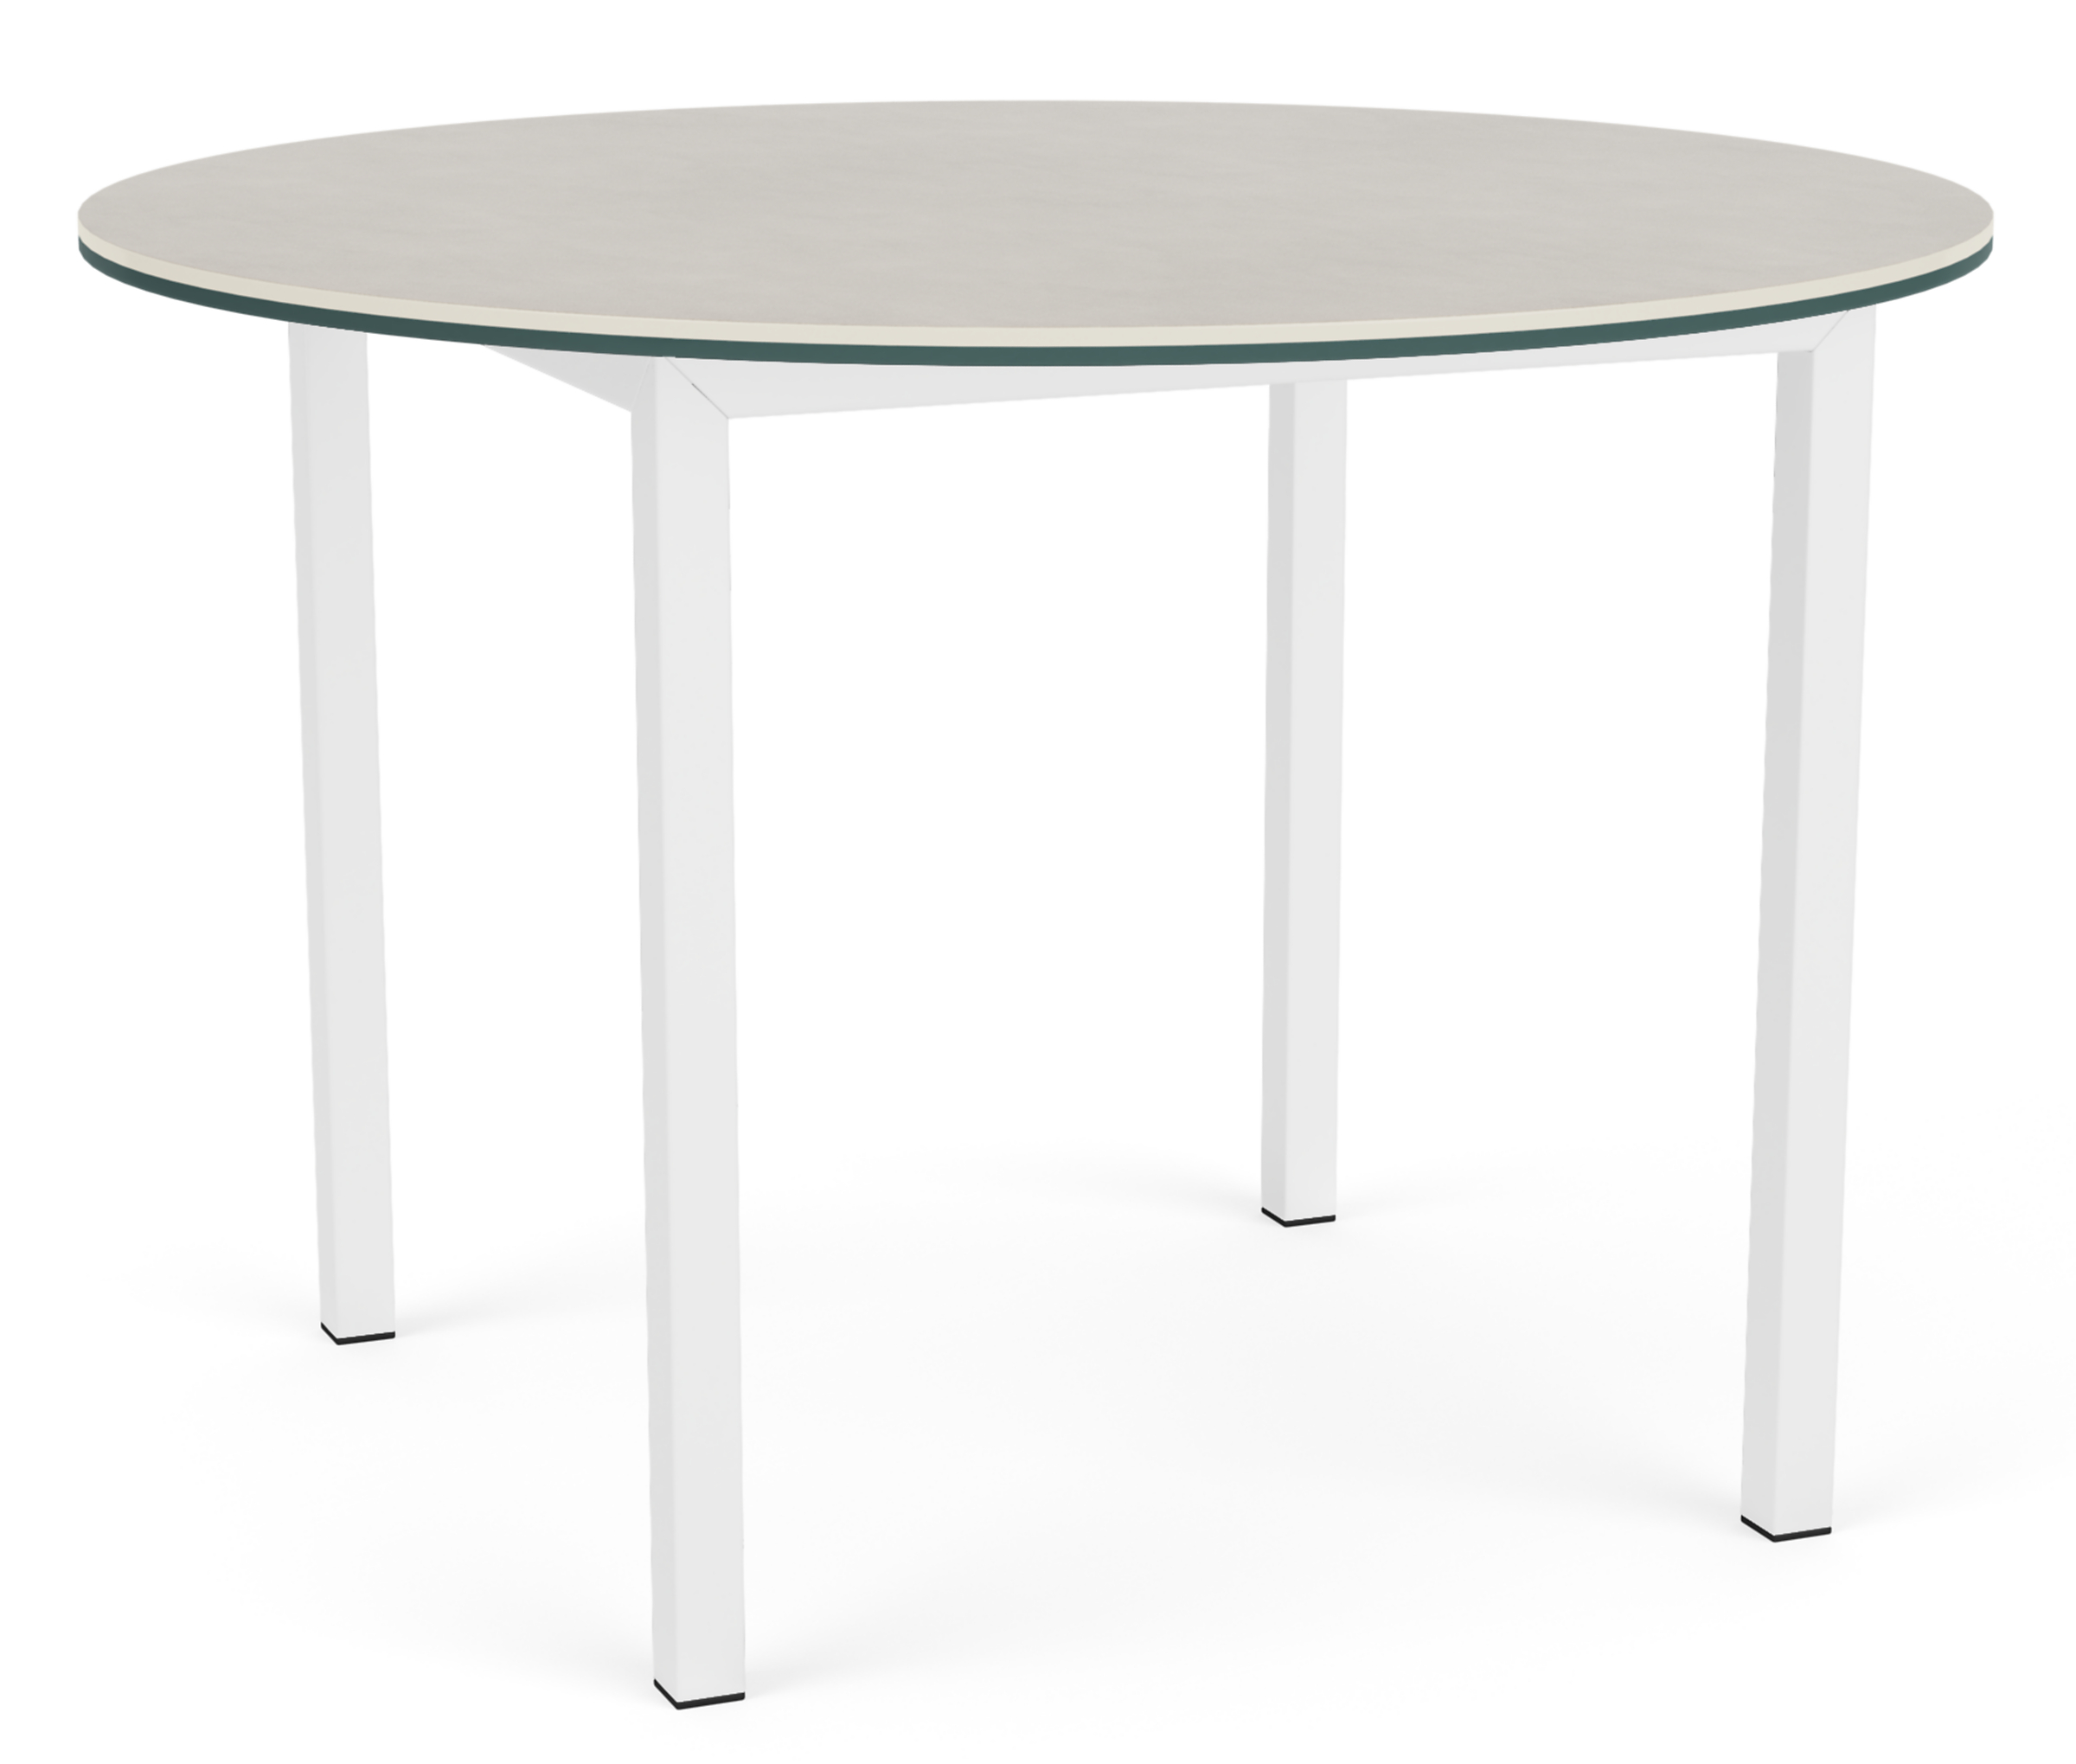 Parsons 36 diam 1.5" Outdoor Table in White with Taupe Ceramic Composite Top